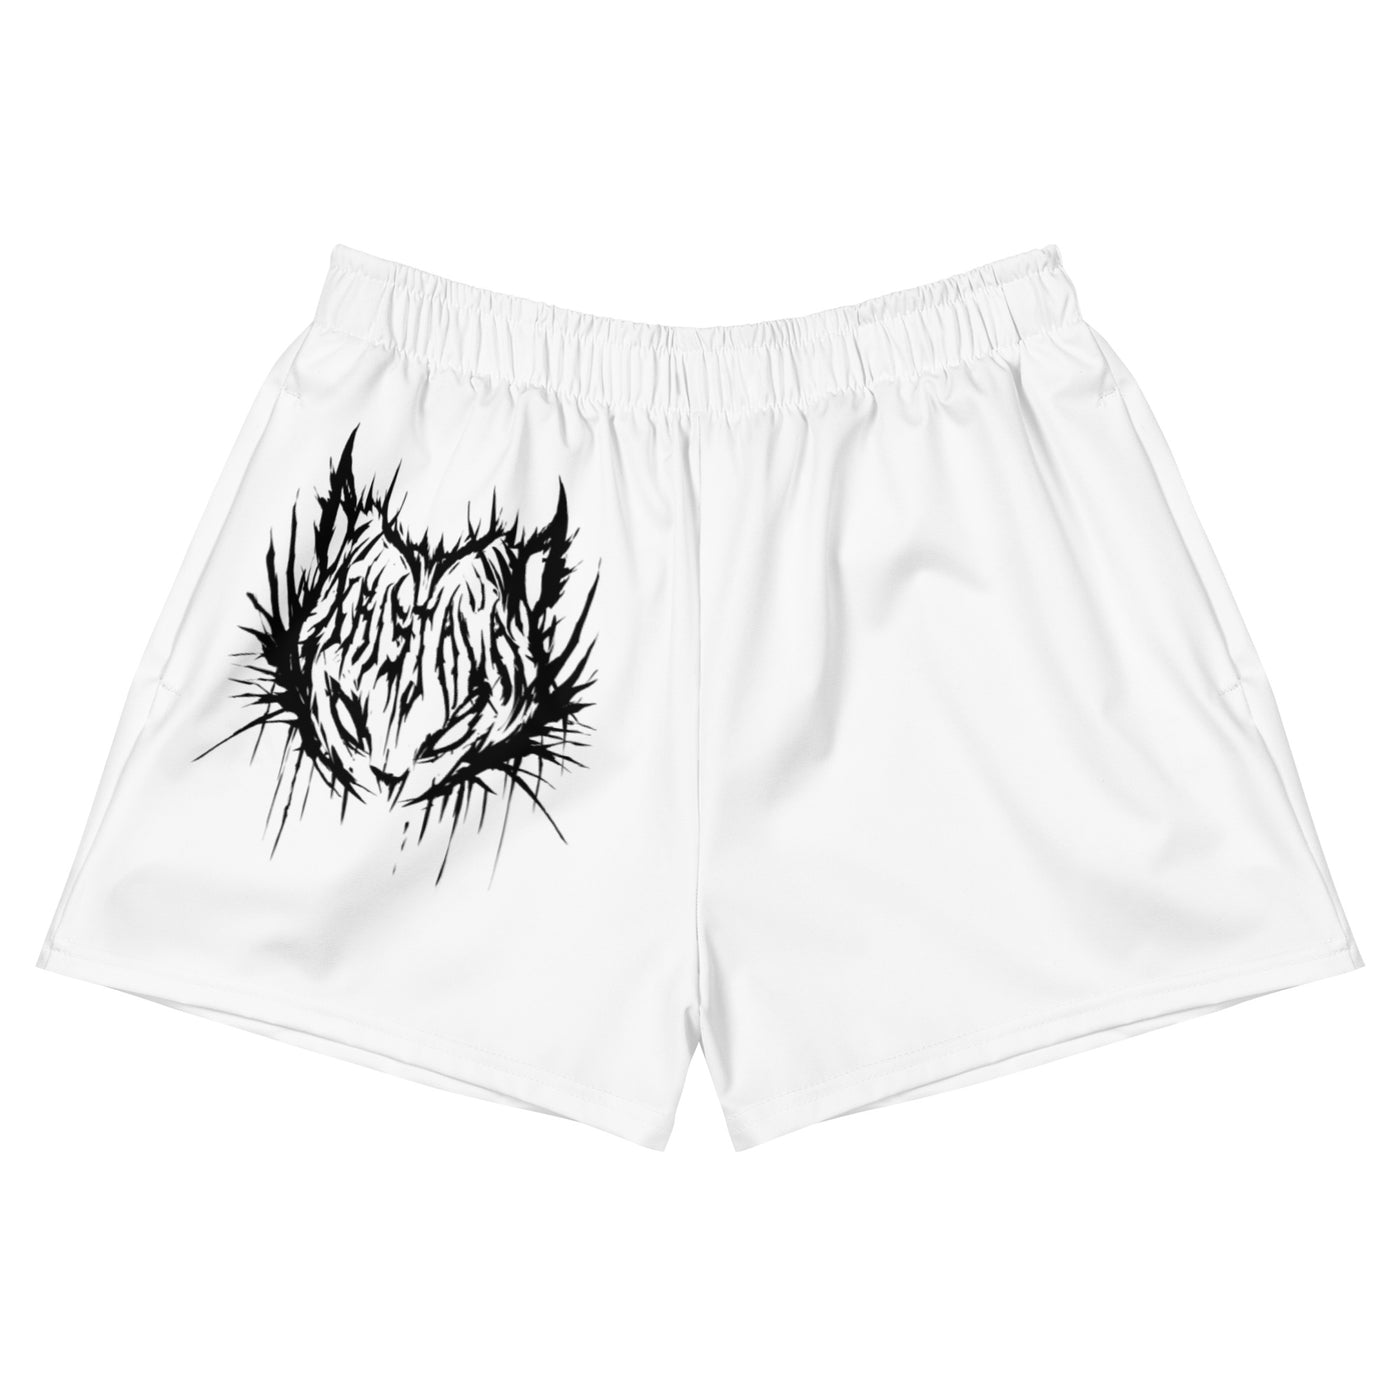 Cursed Collection Athletic Short Shorts